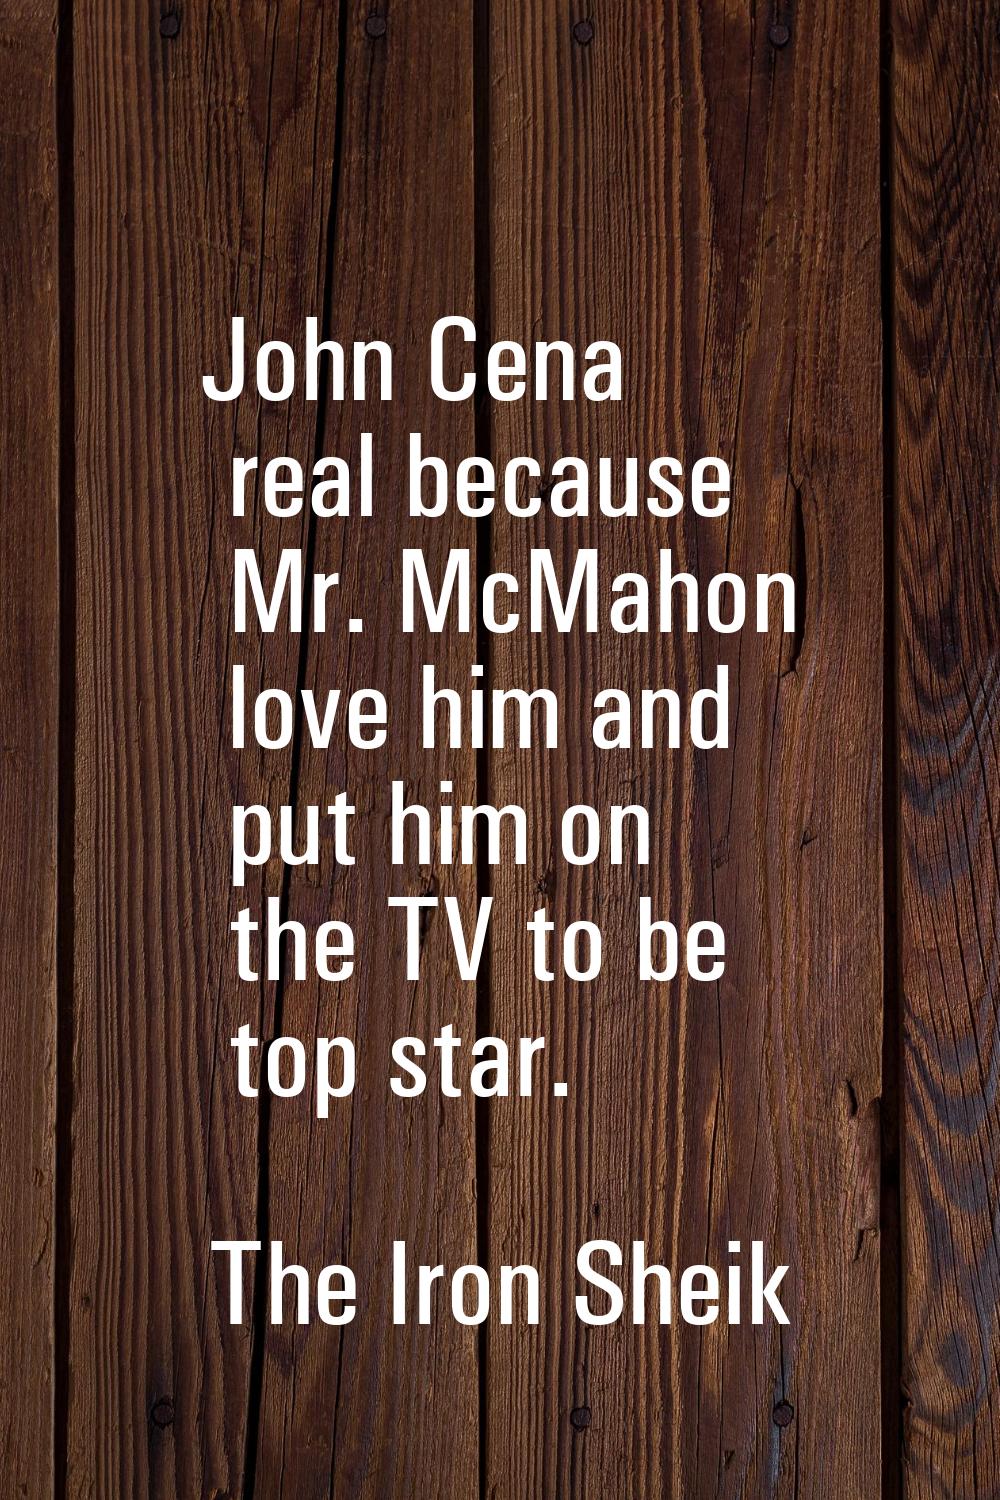 John Cena real because Mr. McMahon love him and put him on the TV to be top star.